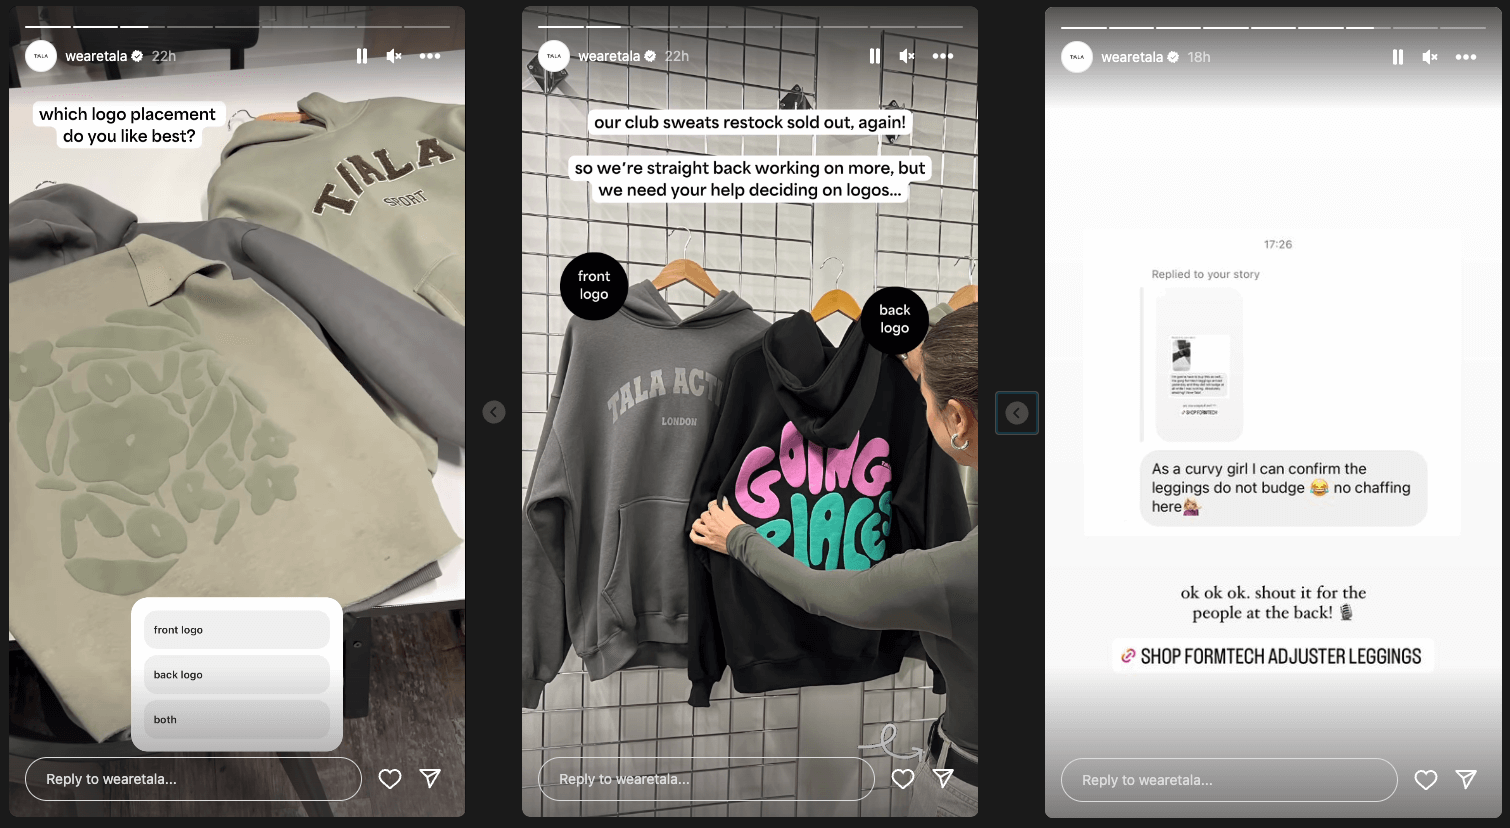 3 Instagram stories from activewear brand TALA, demonstrating customer feedback and involvement in product development.